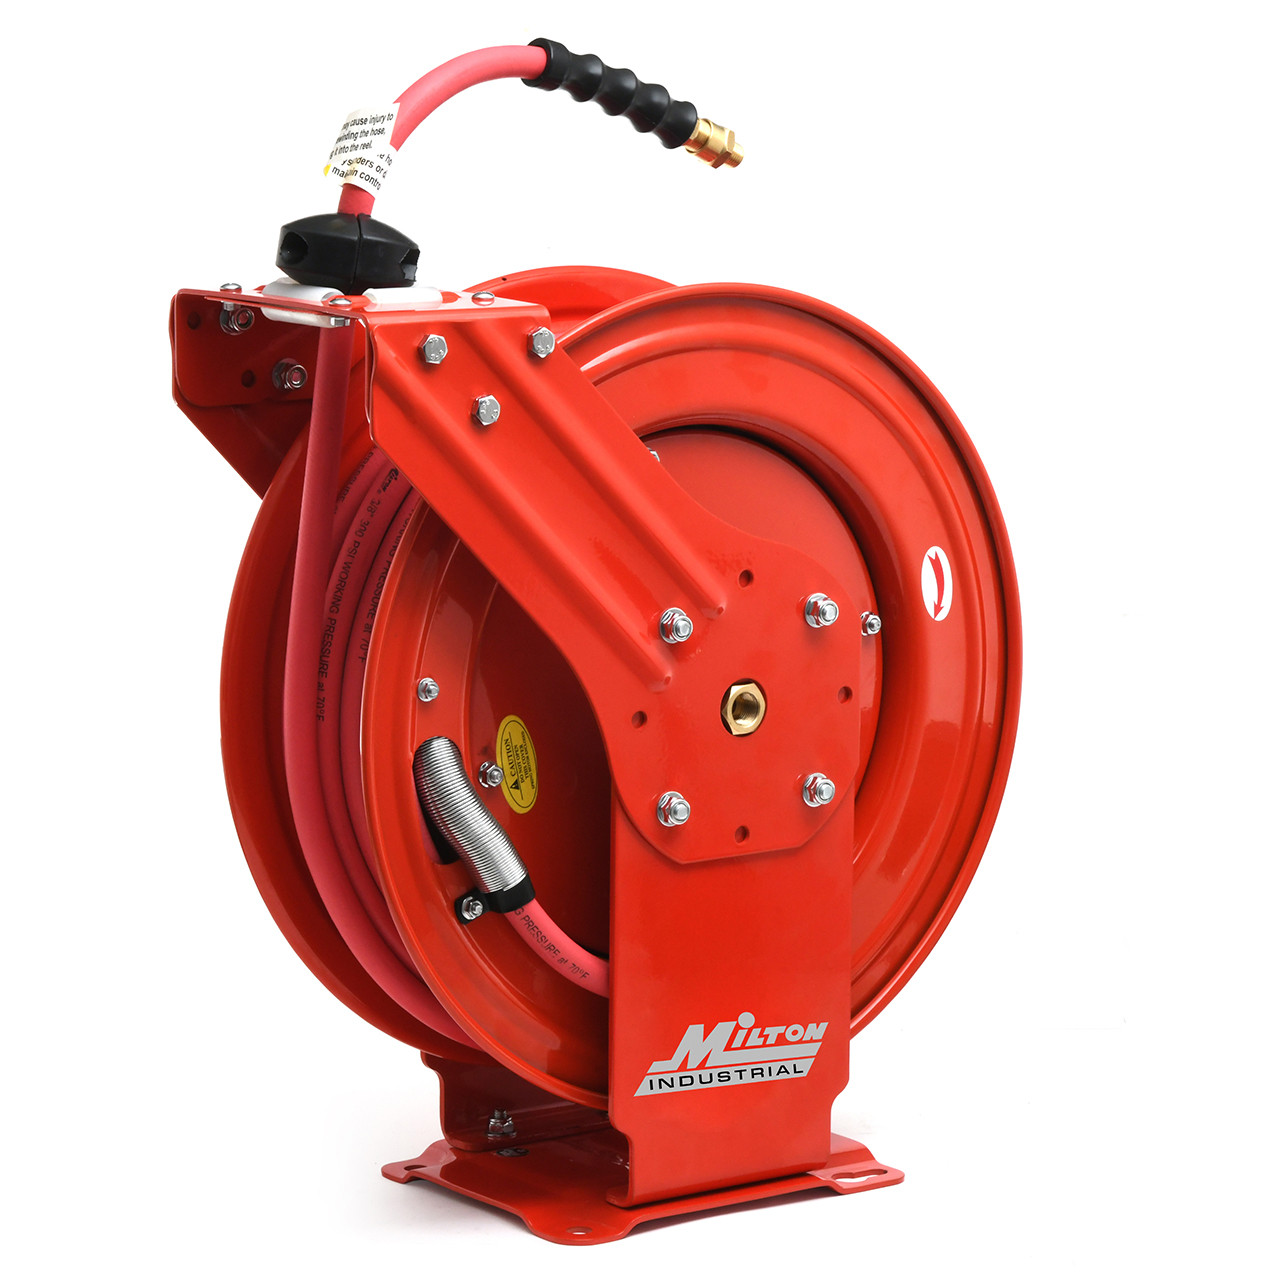 50 Ft. Retractable Hose Reel with 3/8 Air Hose